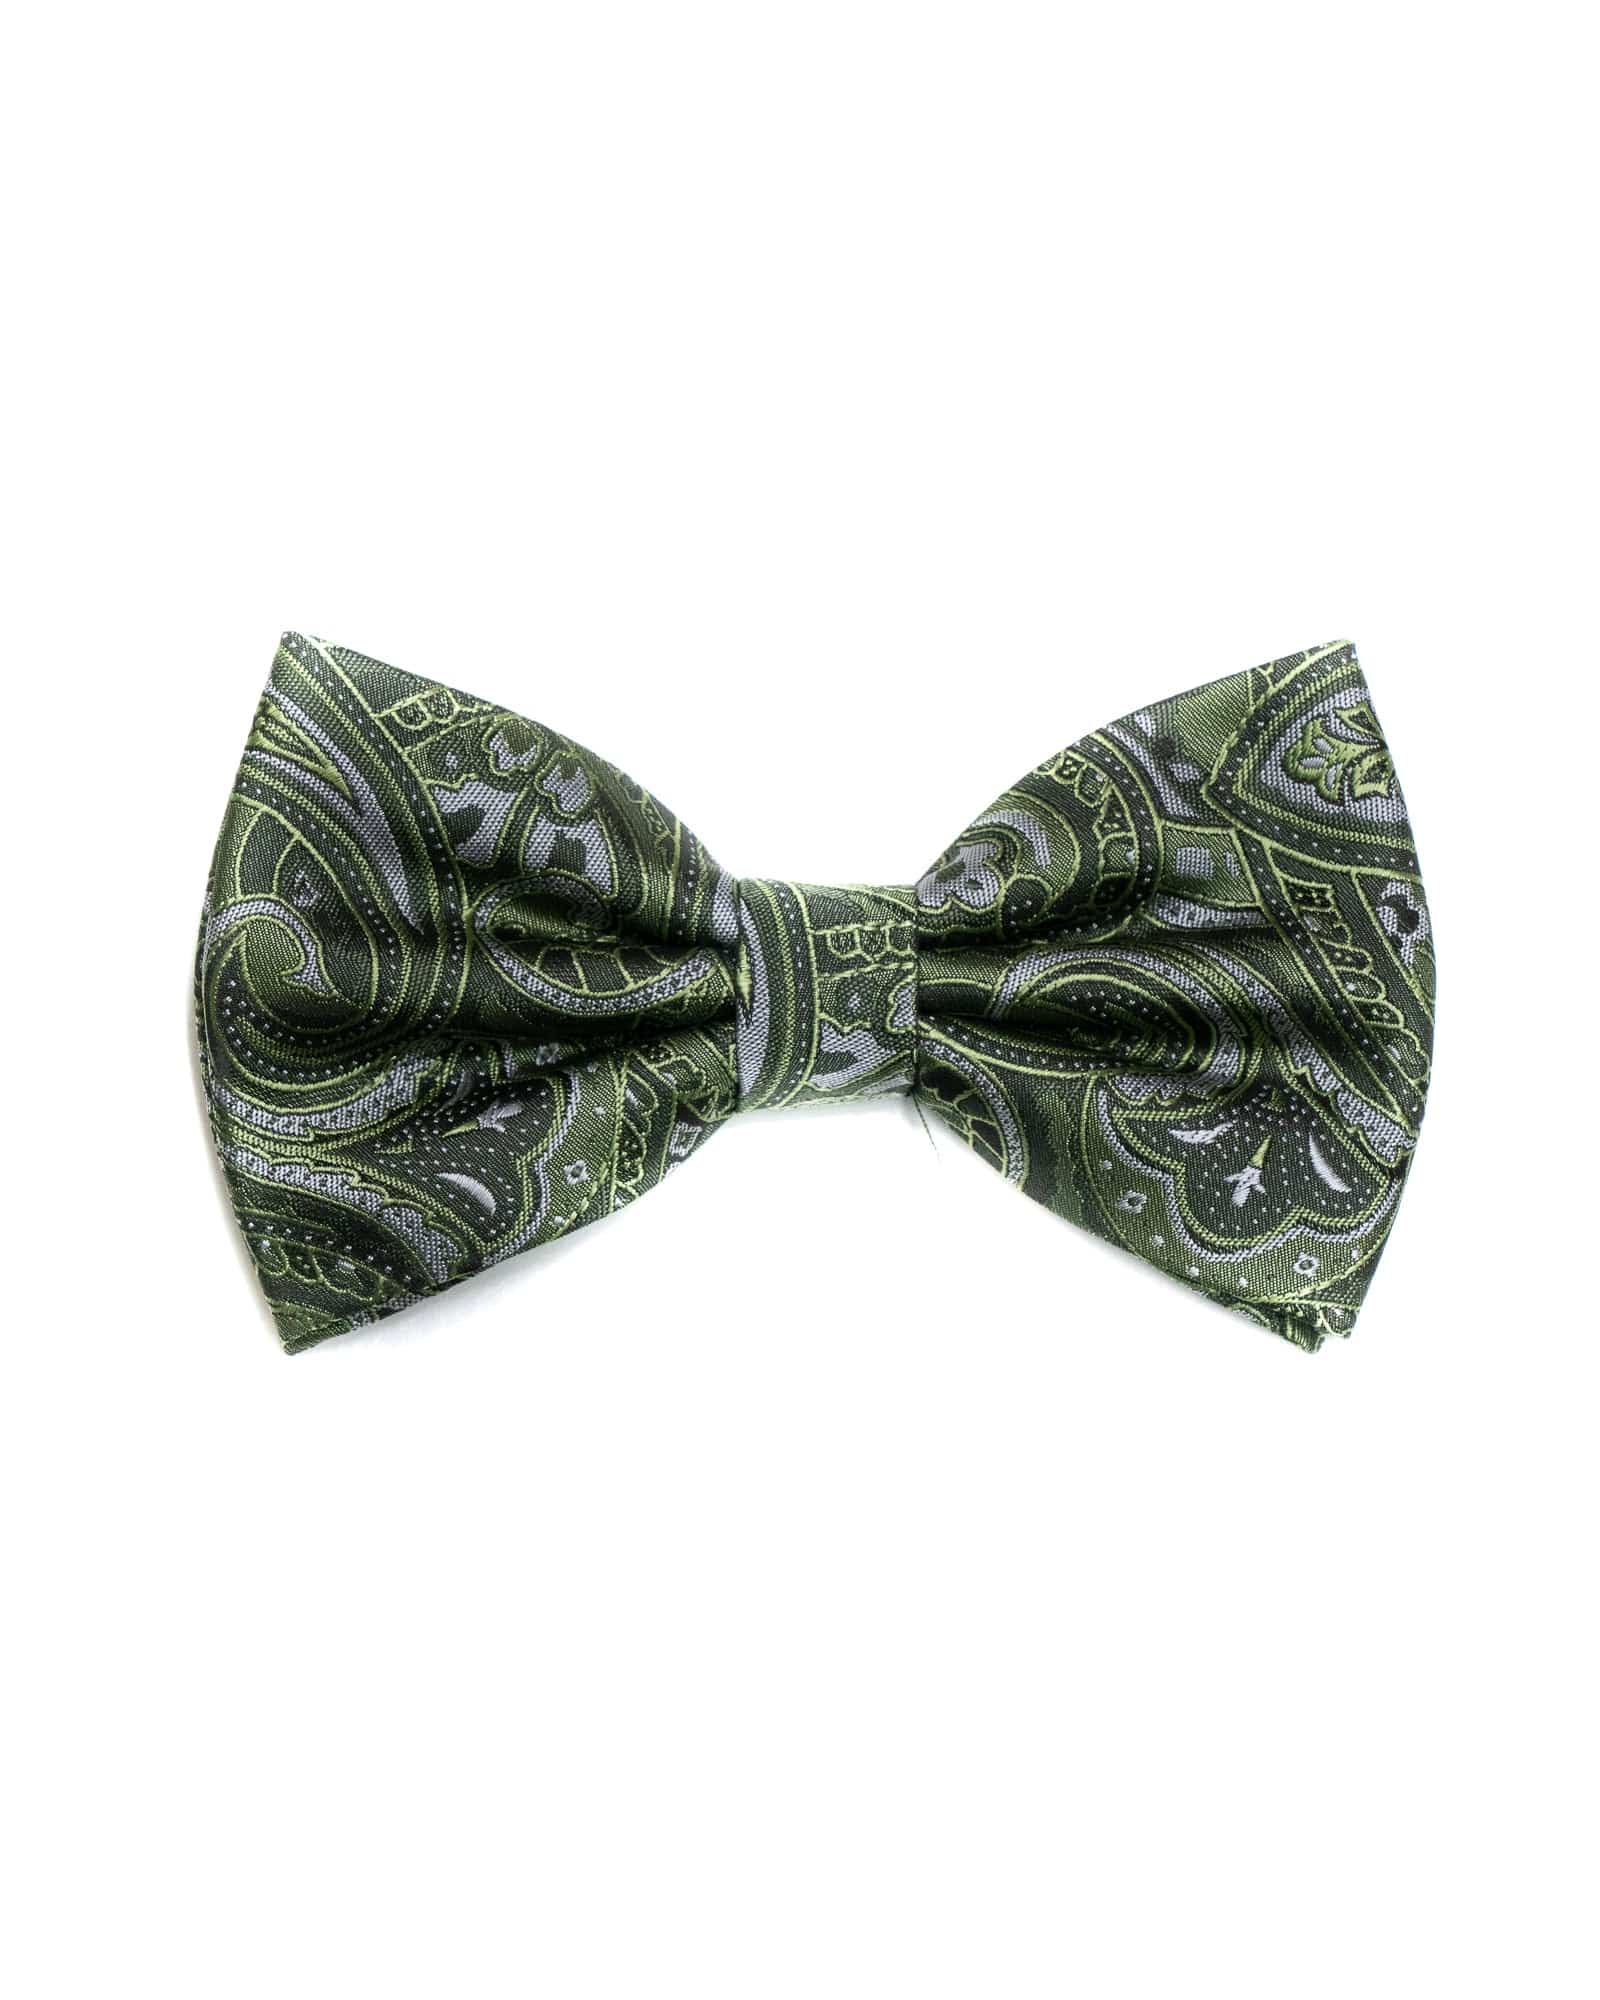 Bow Tie Paisley In Green - Rainwater's Men's Clothing and Tuxedo Rental